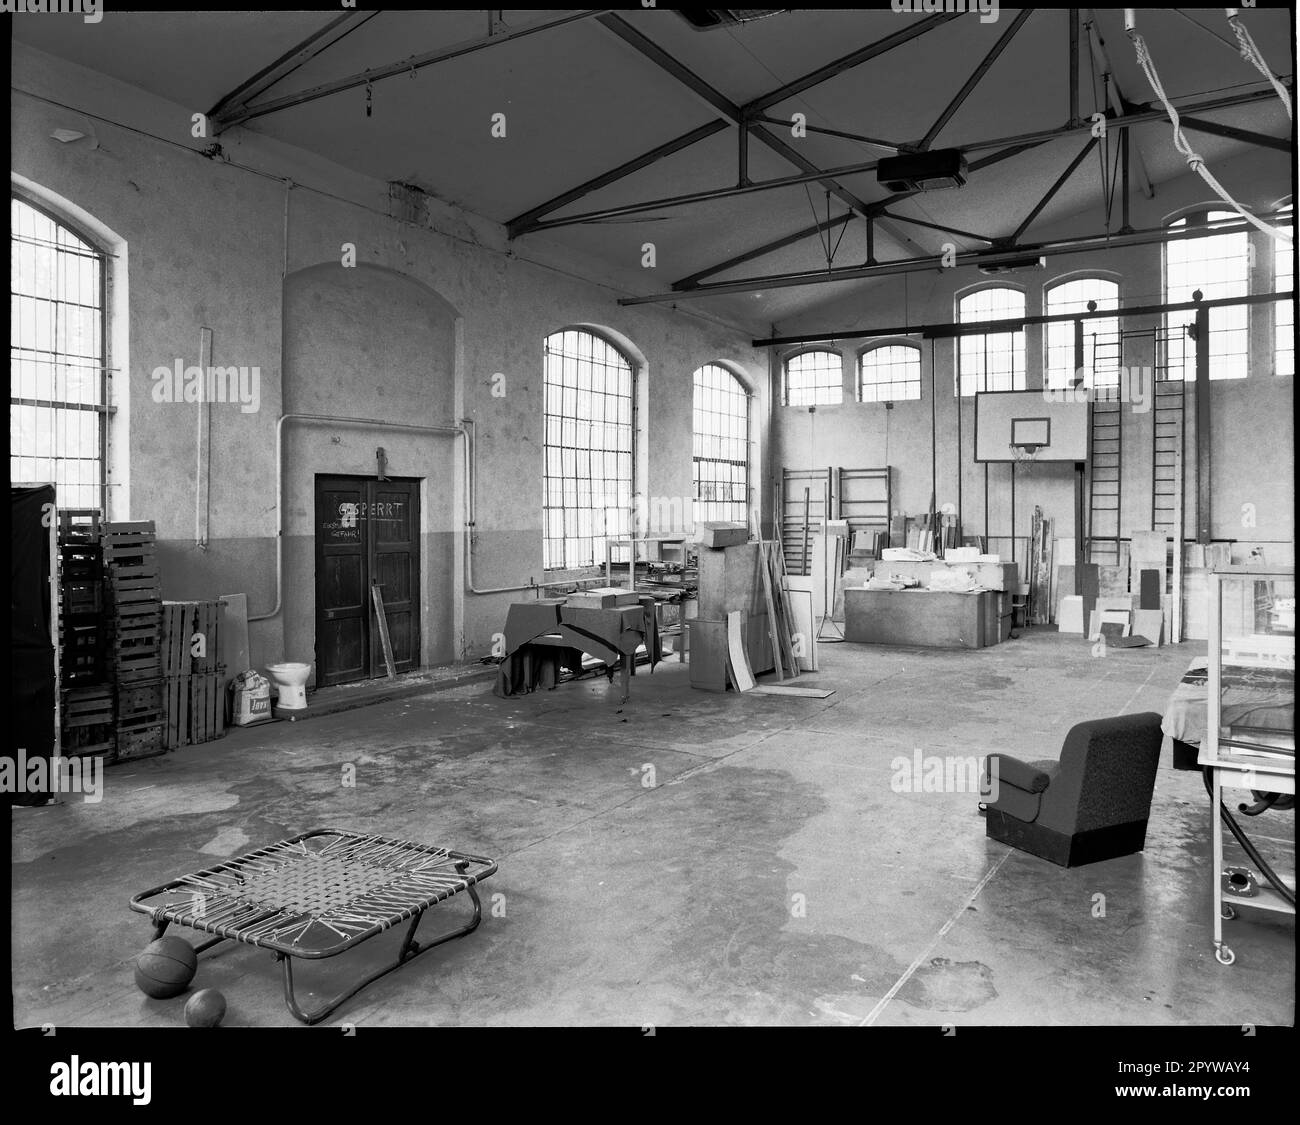 Built around 1900 Black and White Stock Photos & Images - Alamy